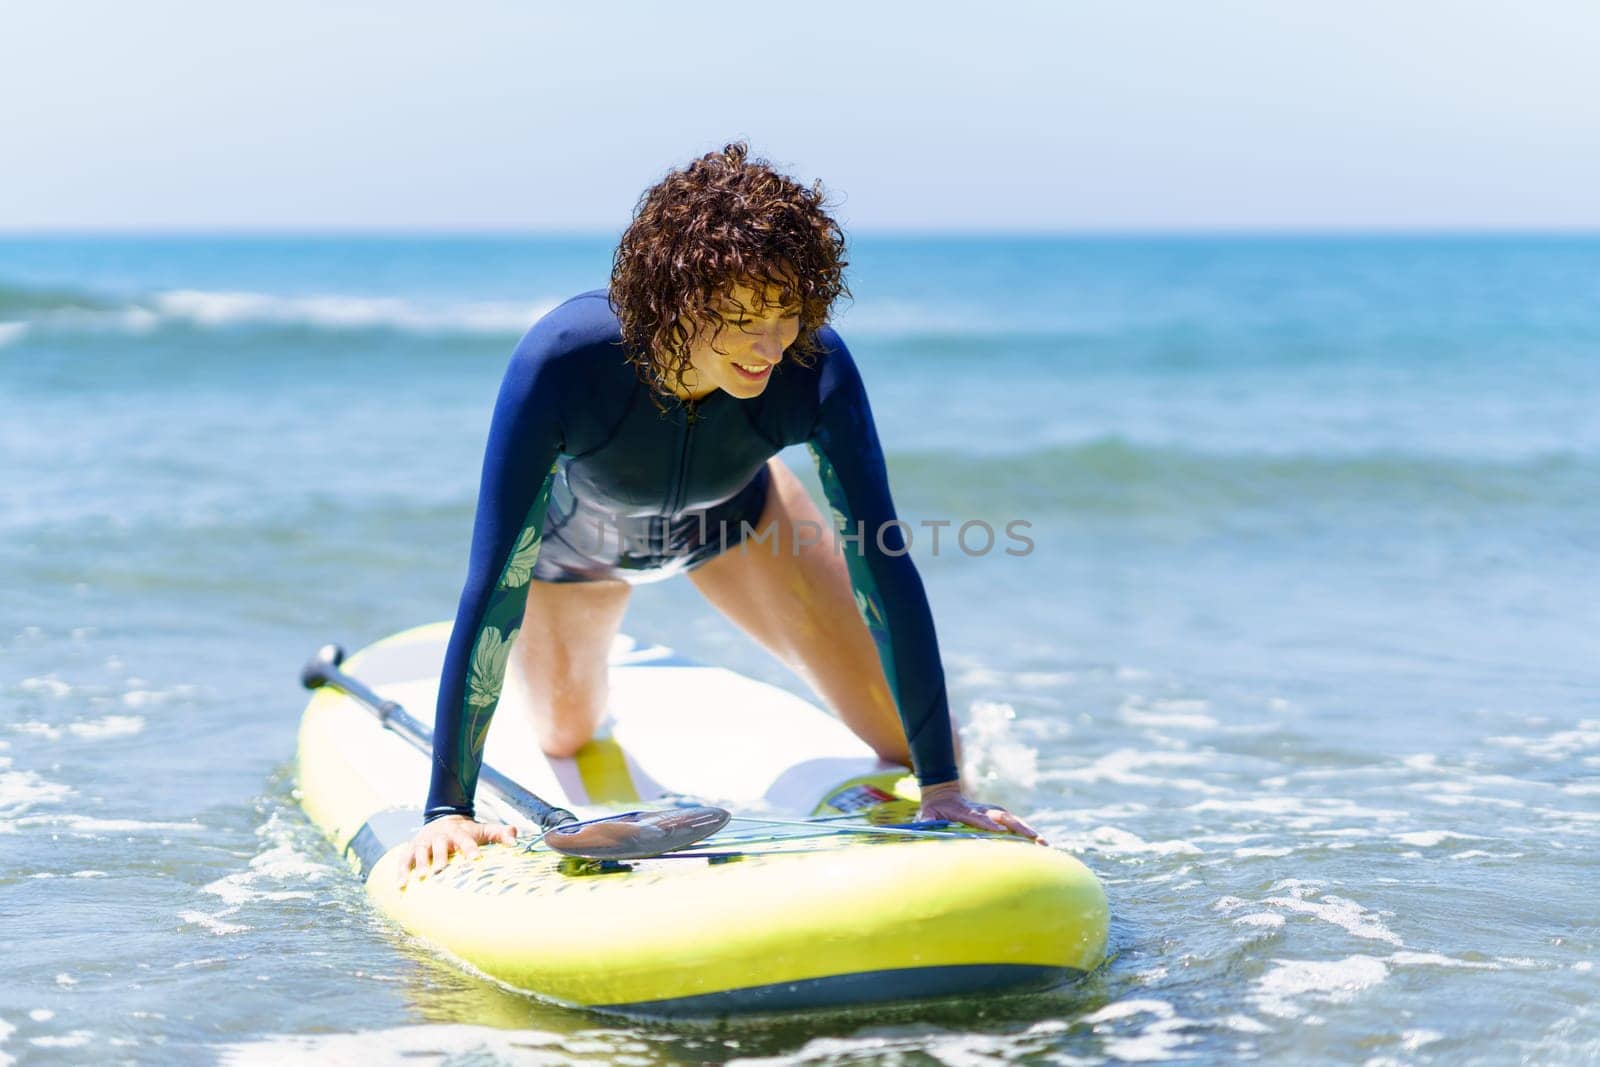 Cheerful young woman in wetsuit with curly hair enjoying surfing on SUP board while floating on sea shore during summer vacation